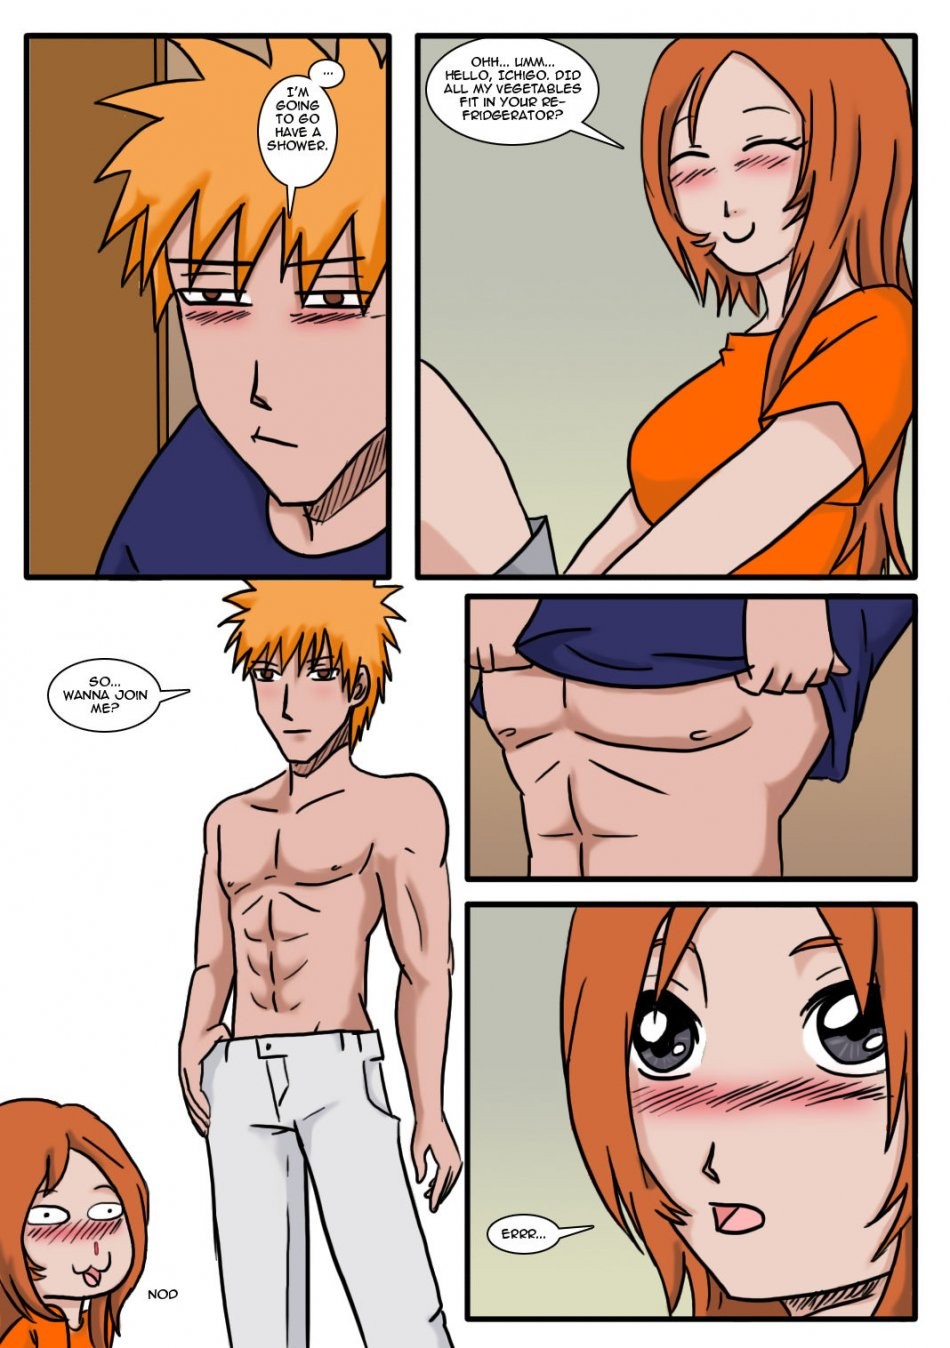 IchiHime - Second Night porn comic picture 4